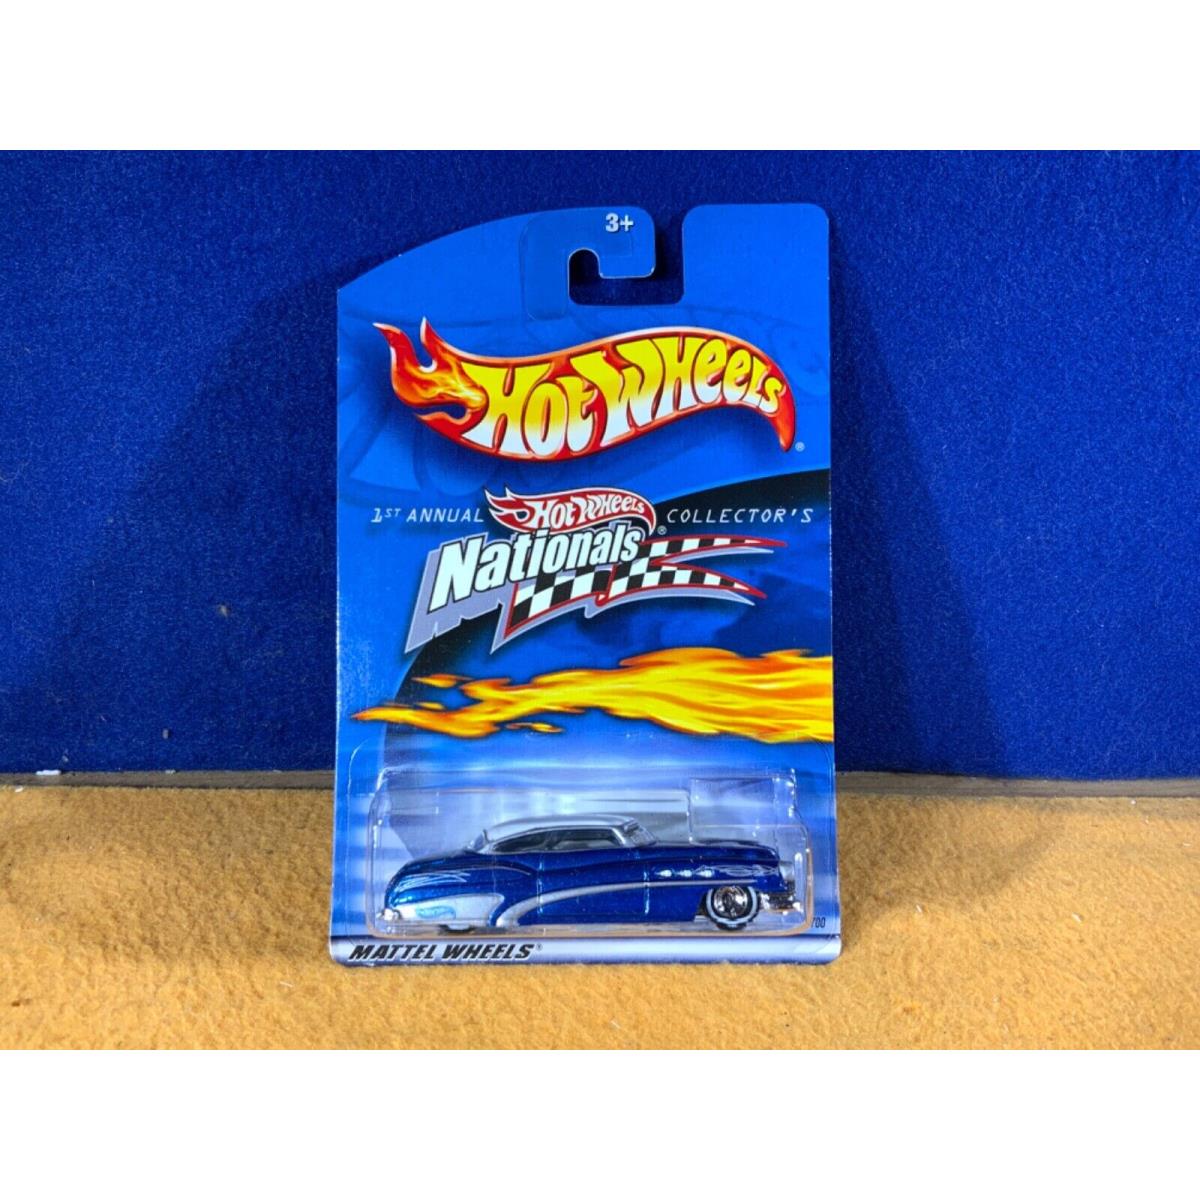 M9-29 Hot Wheels 1st Collector S Nationals - SO Fine Gmtm - Blue - 2001